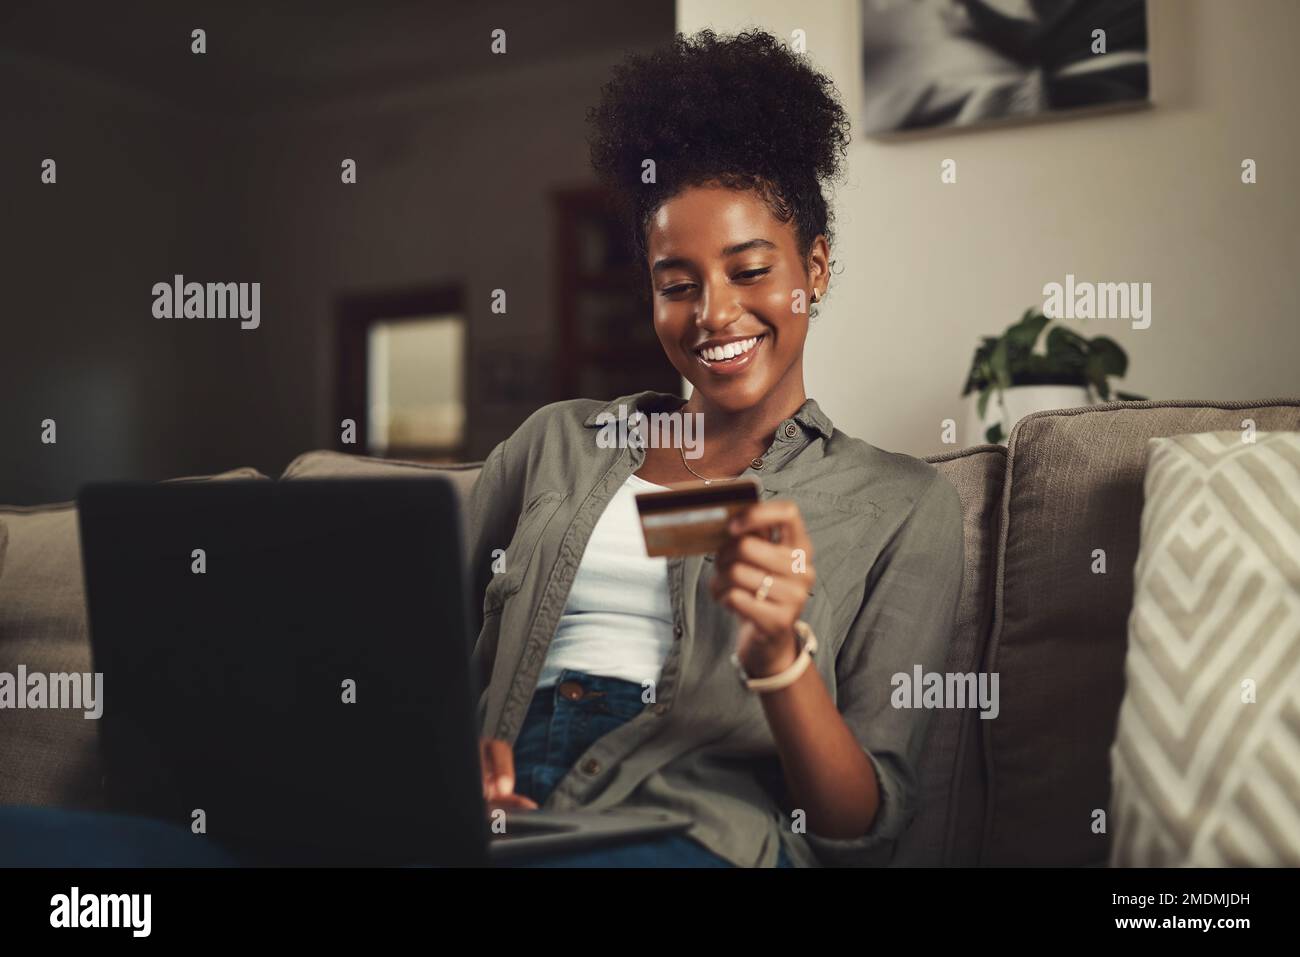 I always need more shoes. a beautiful young woman using her credit card and laptop while relaxing on a sofa at home. Stock Photo